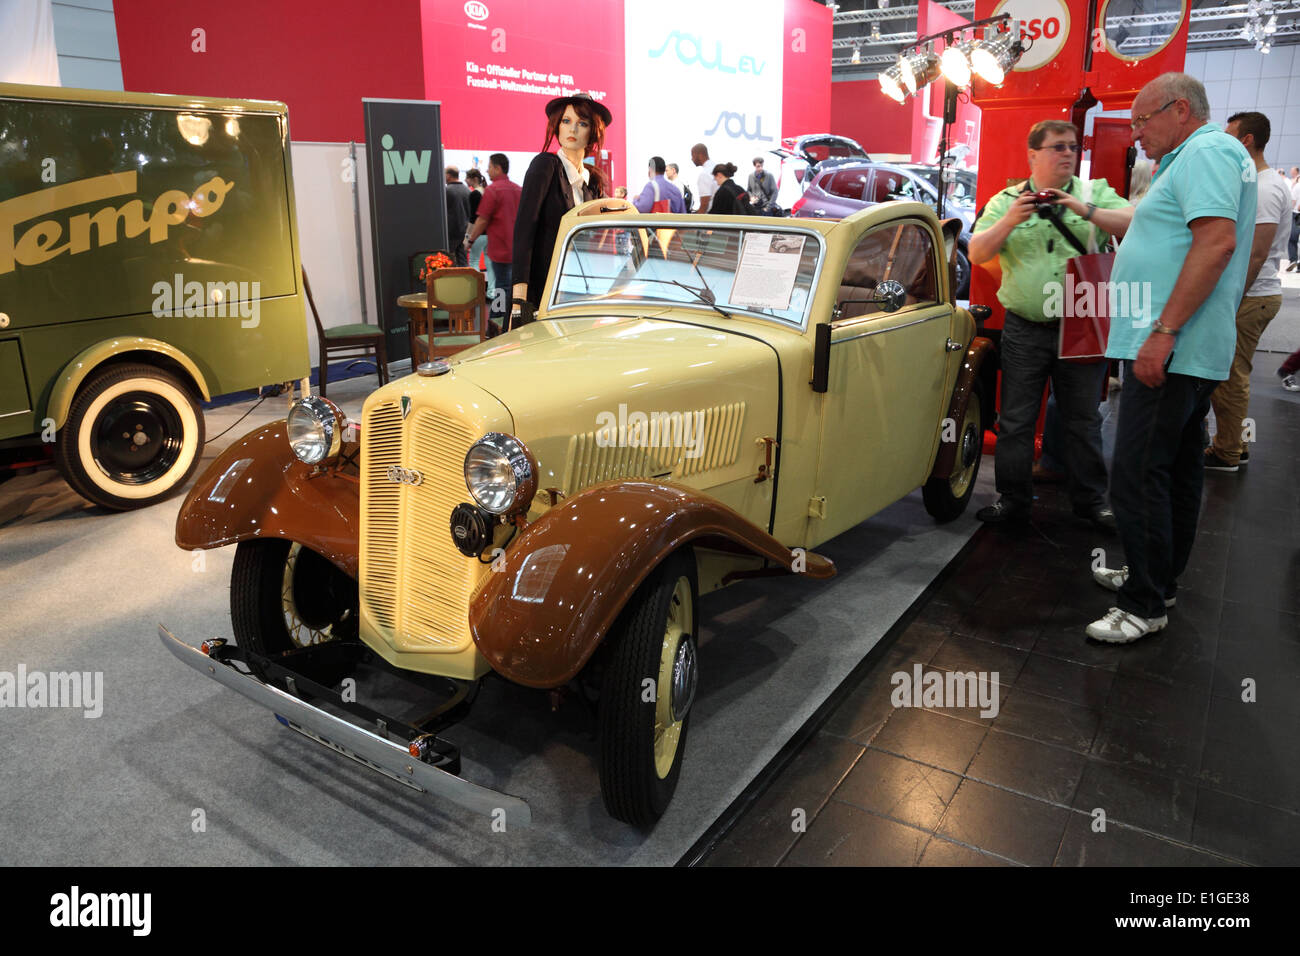 Restored Auto Union Car at the AMI - Auto Mobile International Trade Fair on June 1st, 2014 in Leipzig, Saxony, Germany Stock Photo